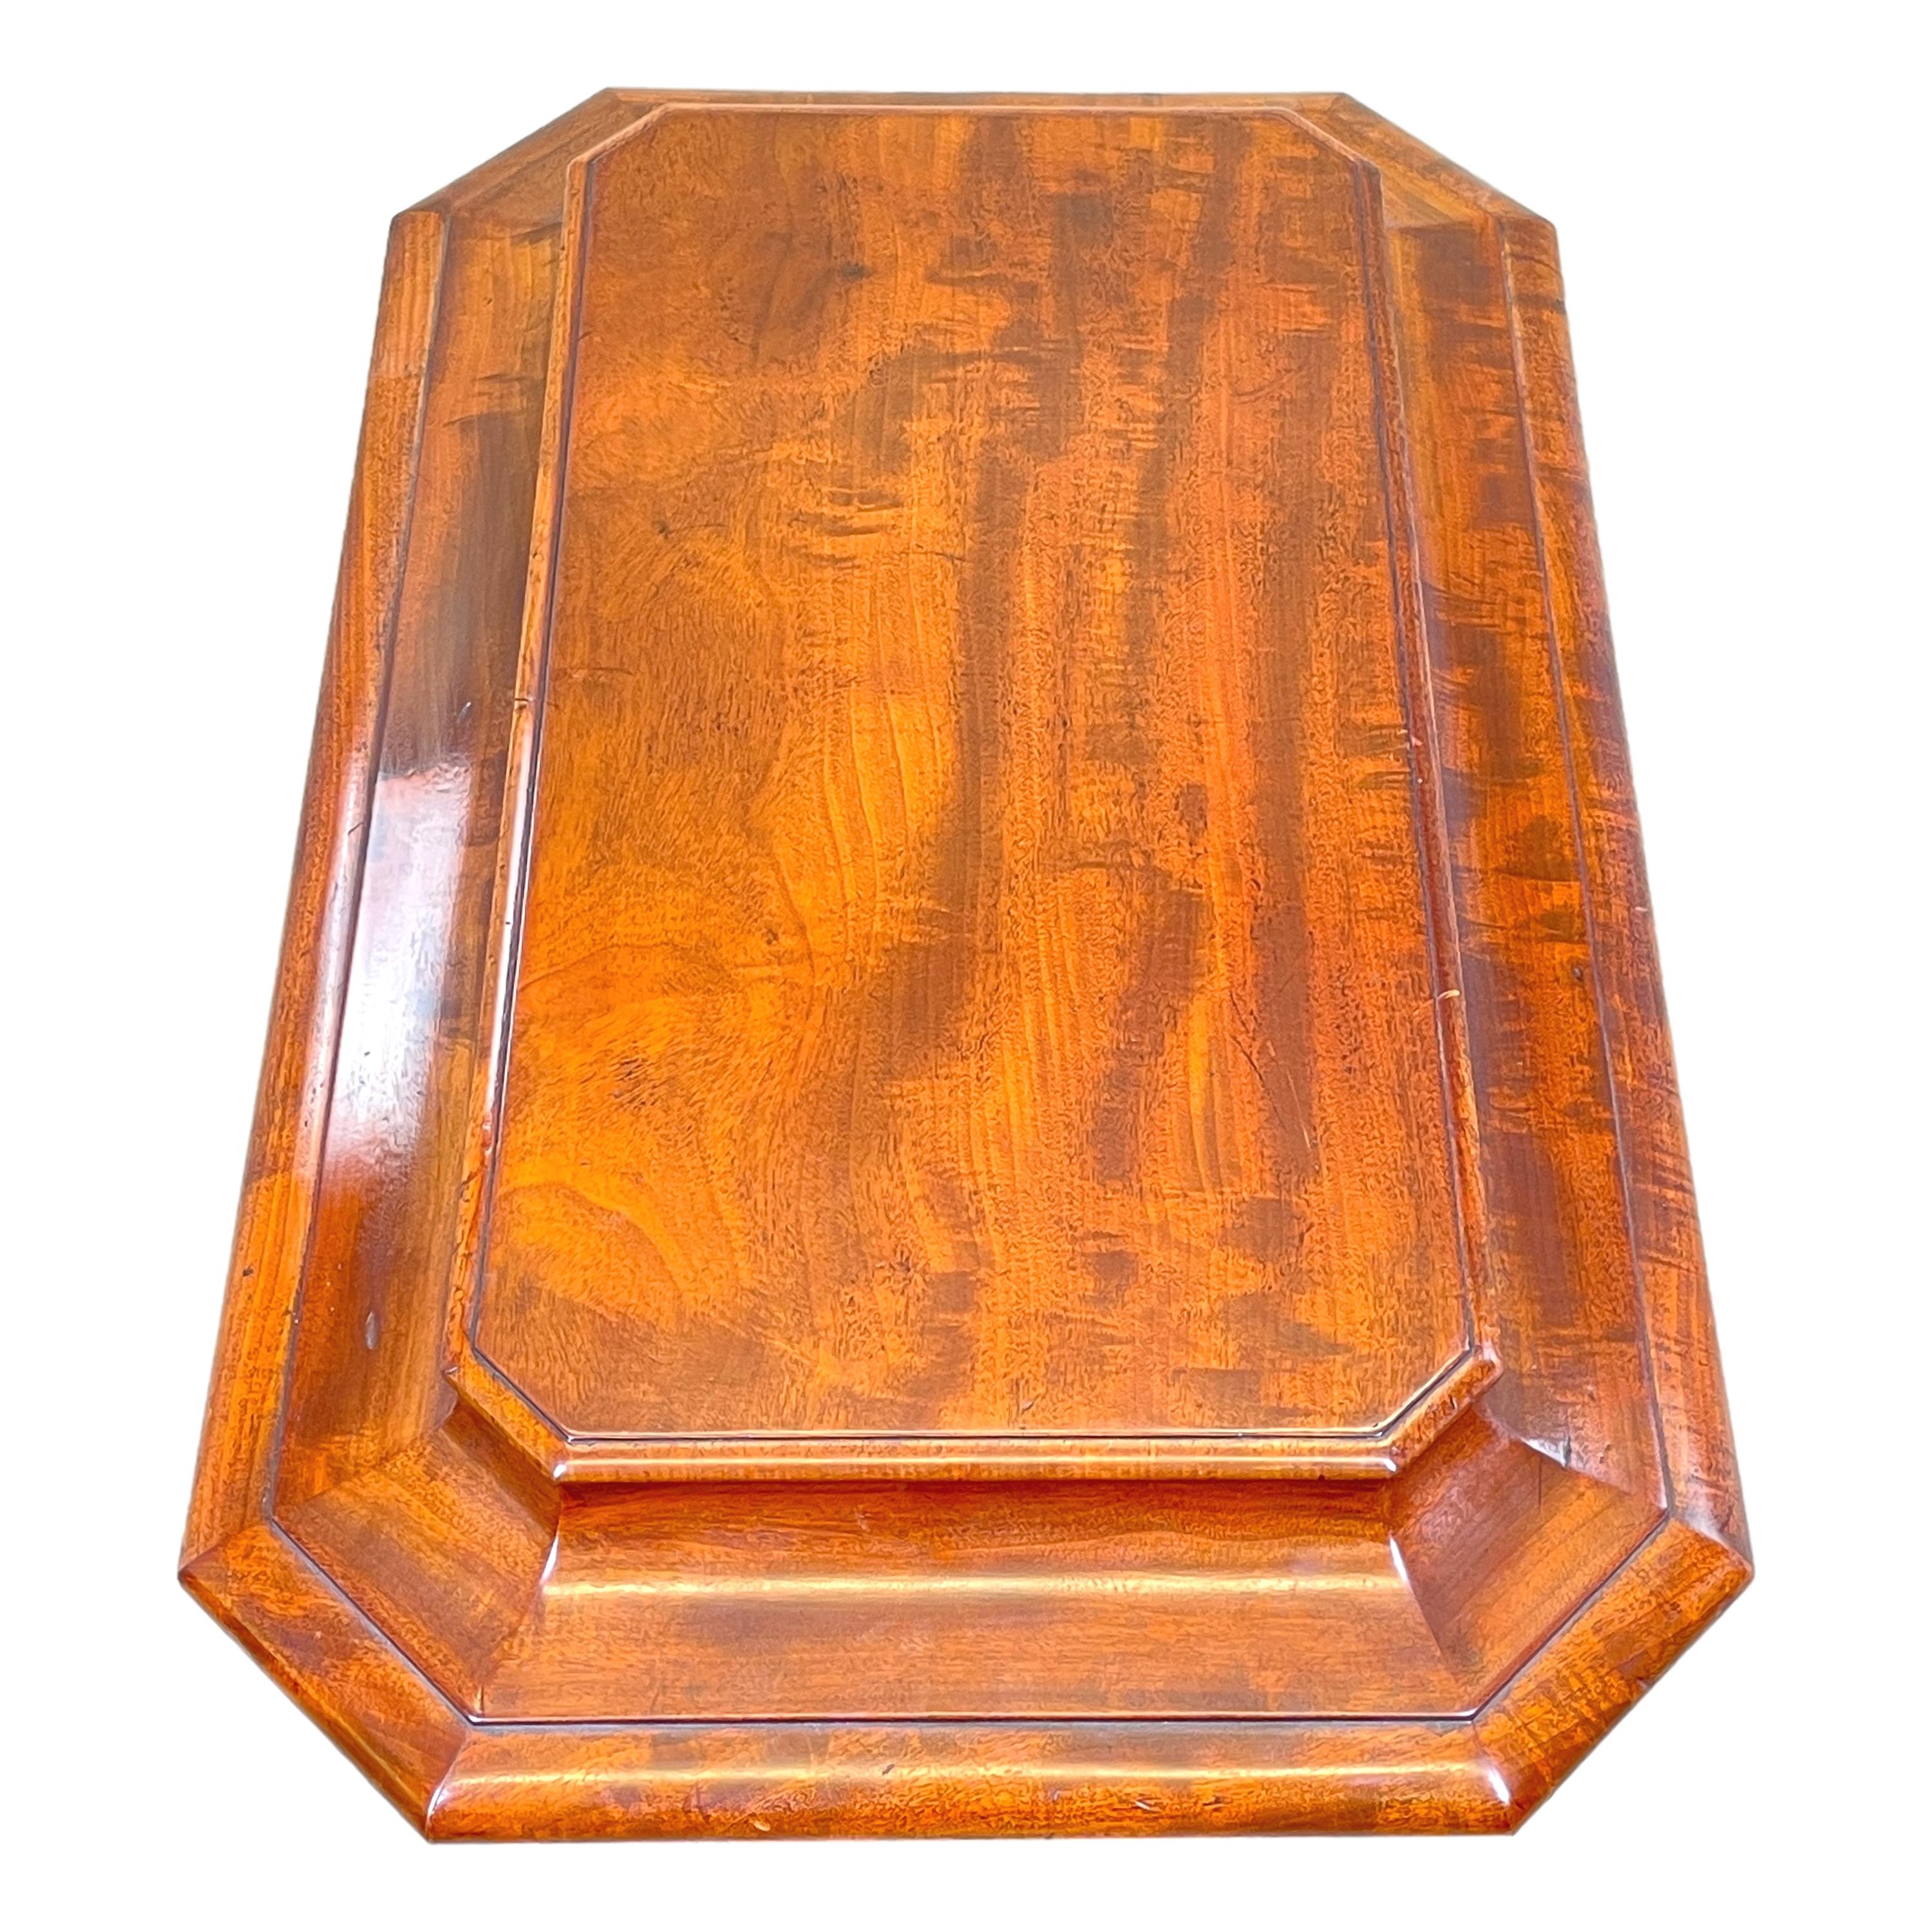 English Regency Mahogany Sarcophagus Shaped Wine Cooler In Good Condition For Sale In Bedfordshire, GB